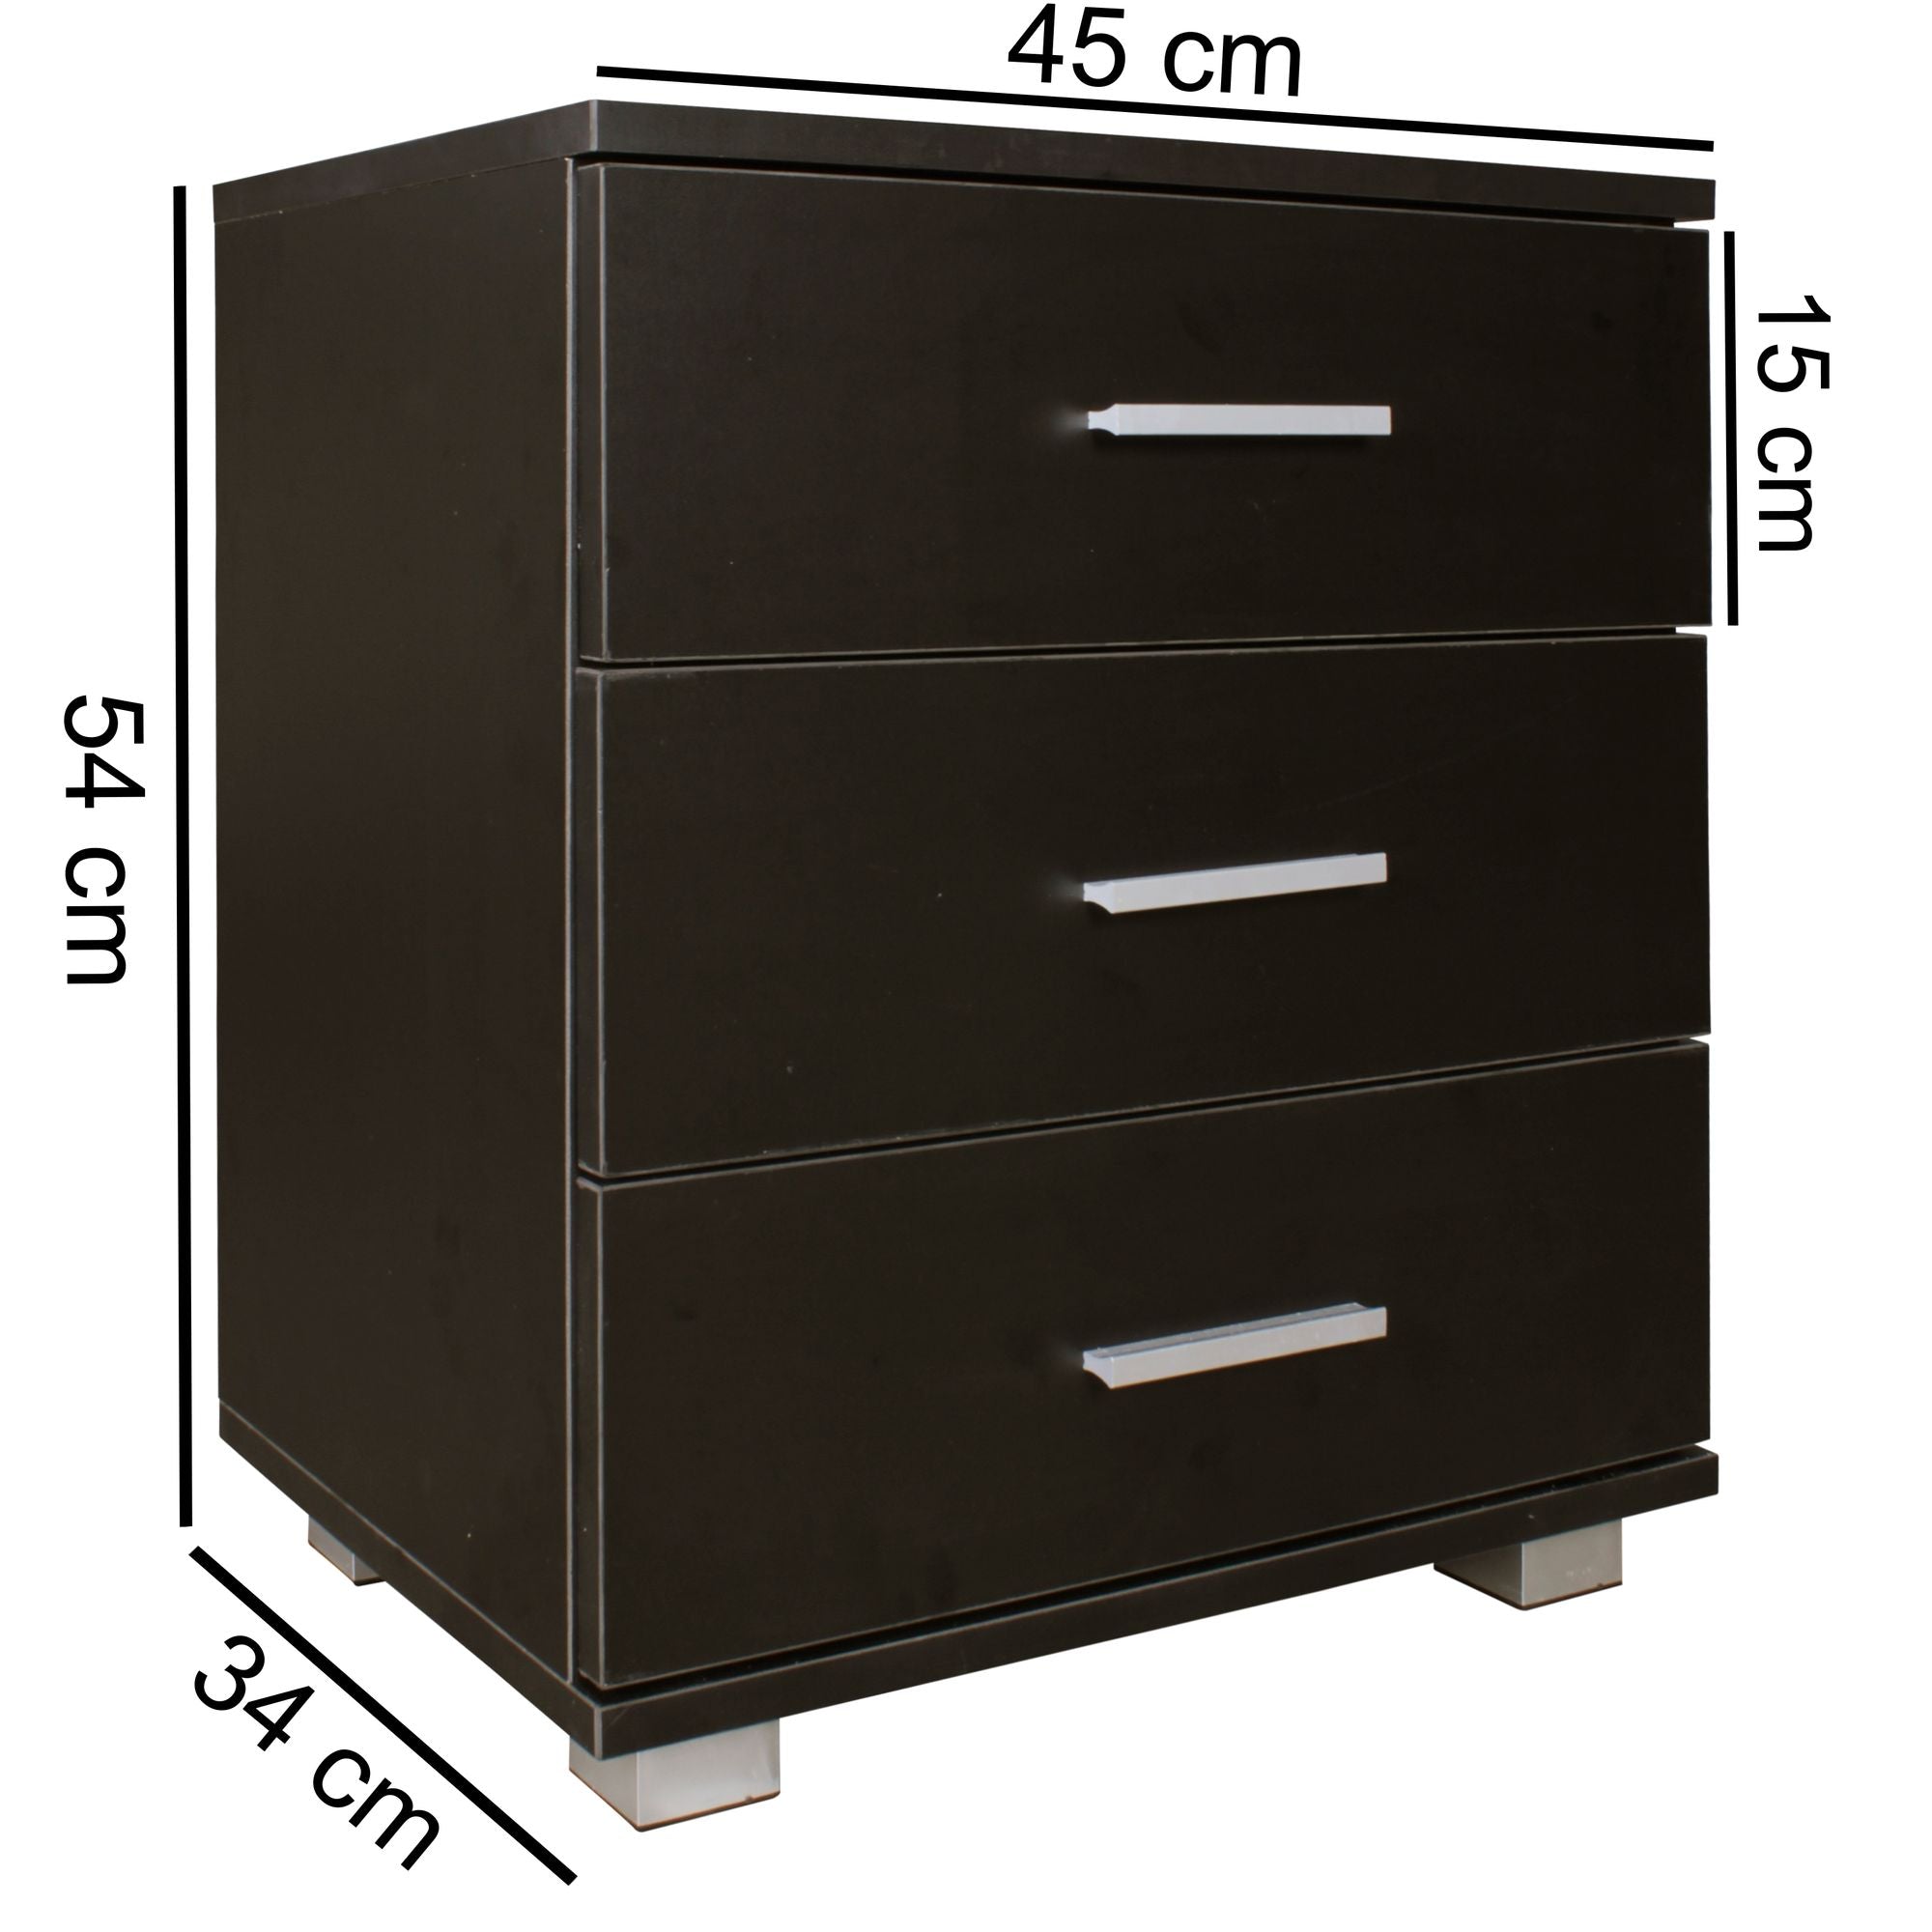 Nancy's Lamar Bedside table - Bedside table - Console - Chest of drawers - Cupboard - Chest of drawers - 3 Drawers - 45 x 54 x 34 cm (W x H x D)